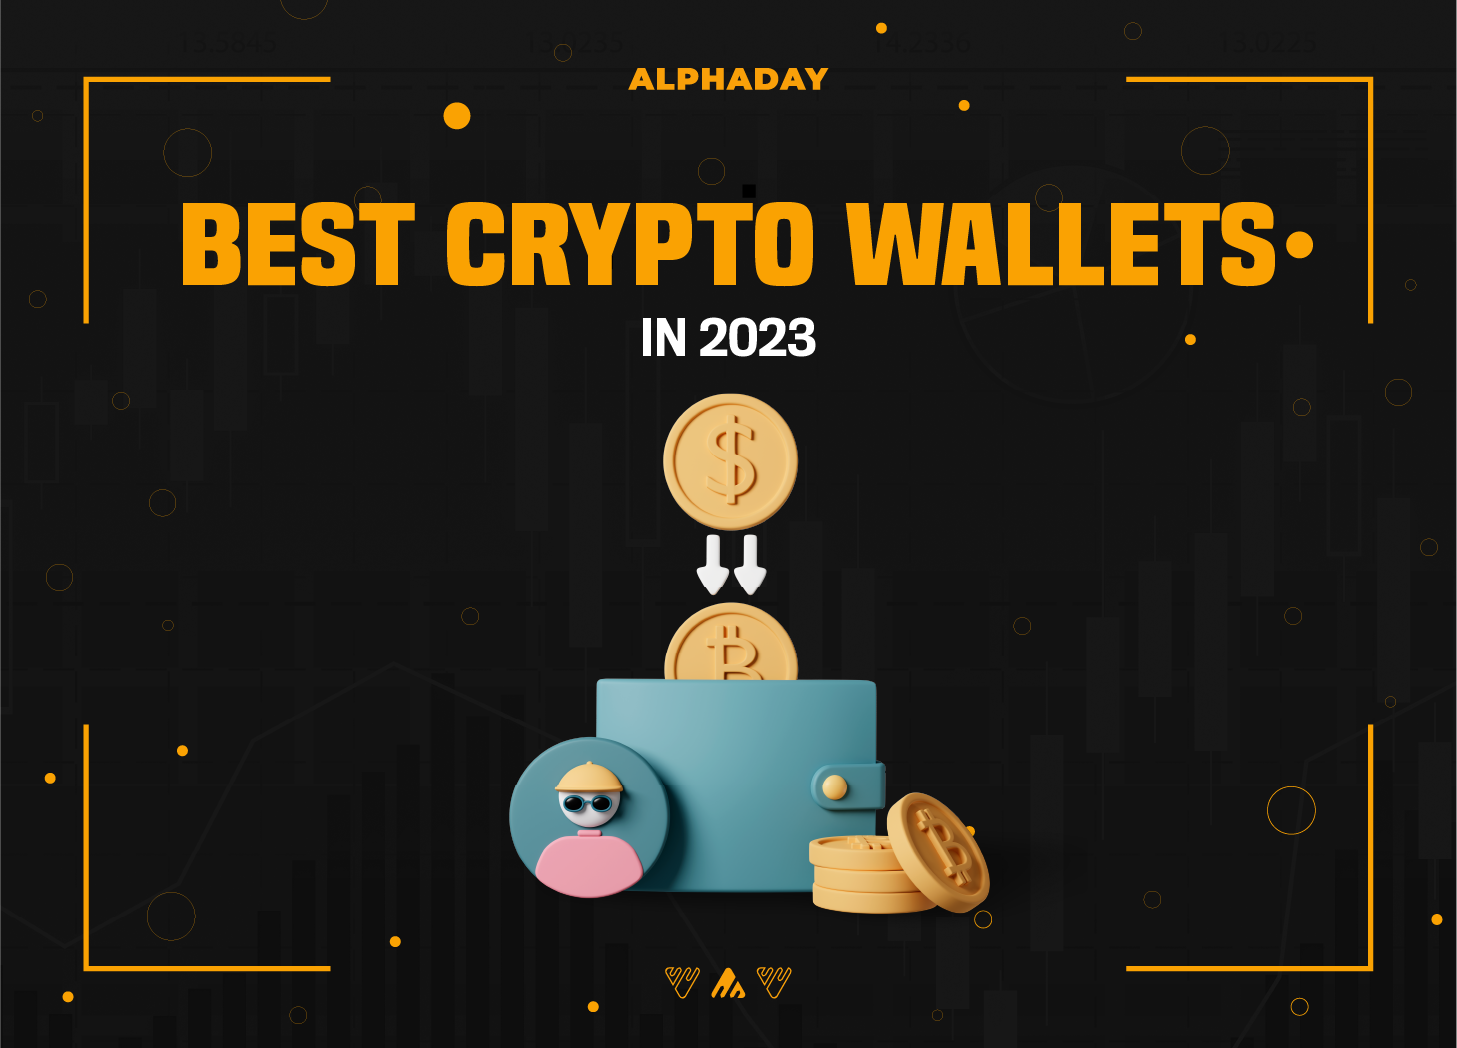 How to choose the best crypto wallet